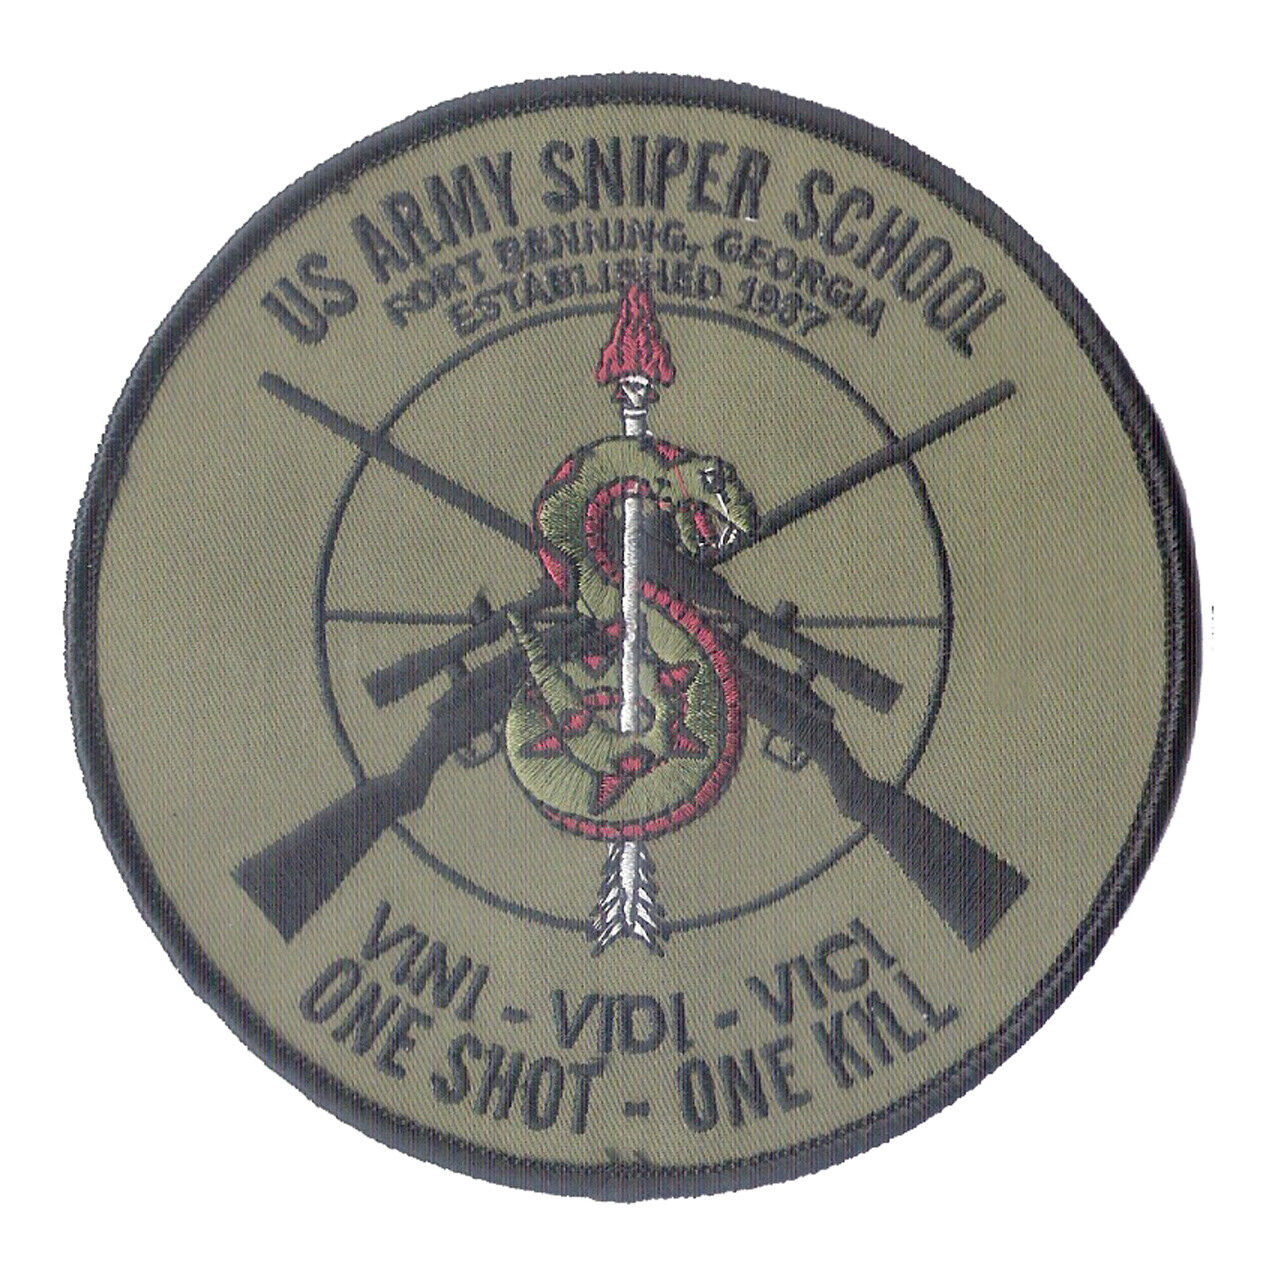 US Army Sniper School OD embroidered patch 5\